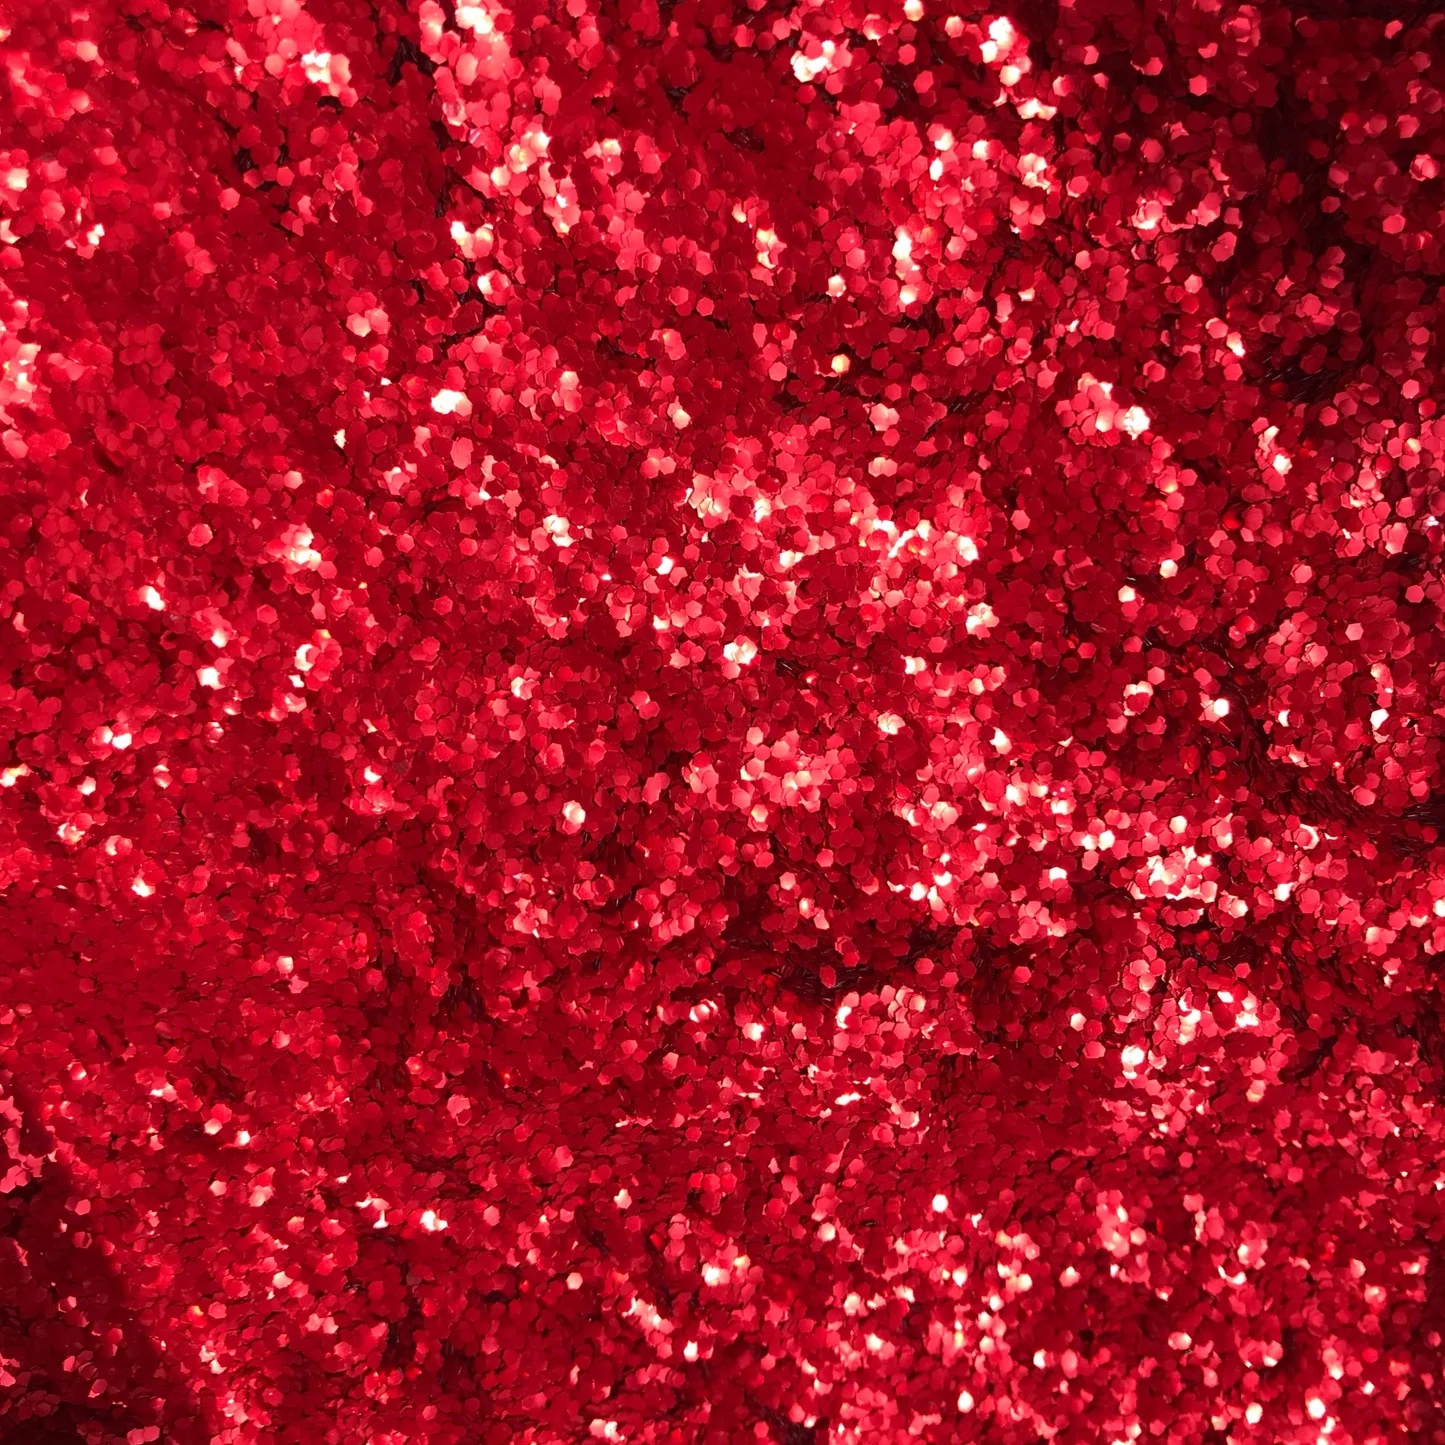 red glitter ornaments on the body hair sparkling